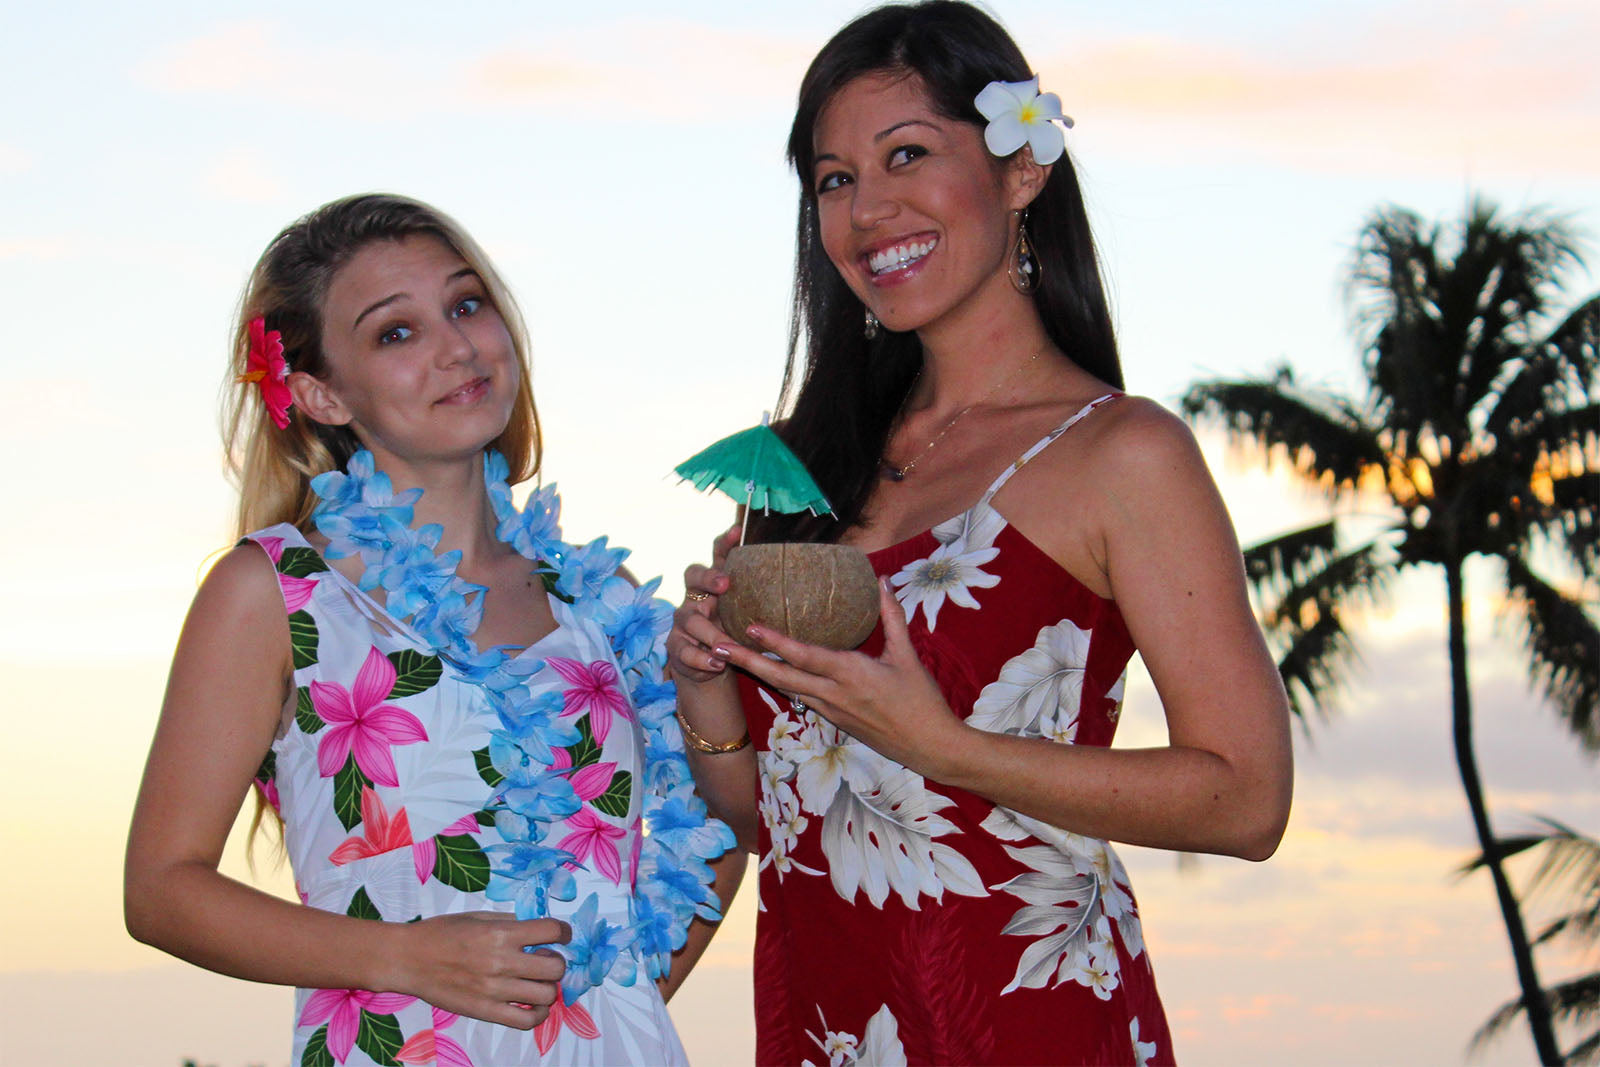 use cheap fake flower leis if you don't have the budget for real flower leis